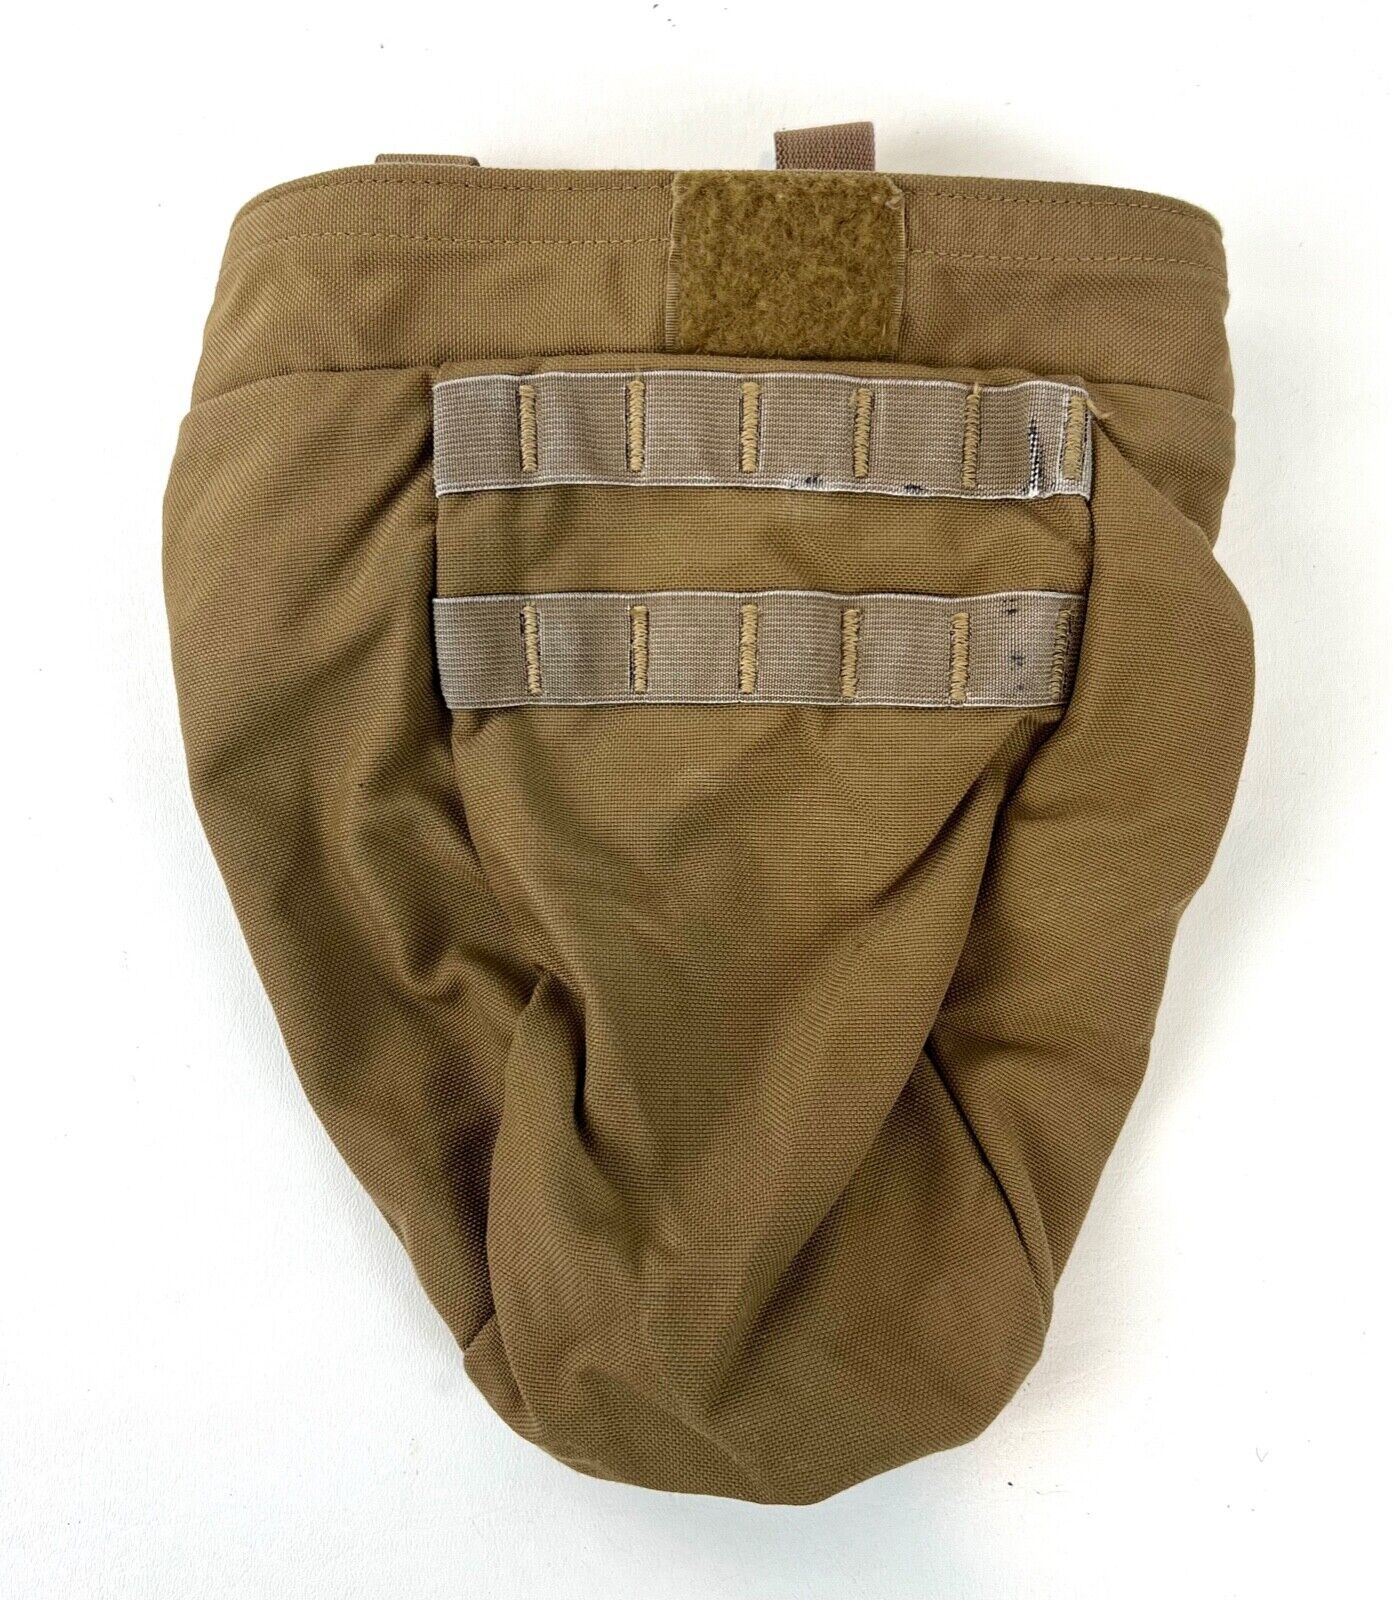 USMC Marine Corps Mag Dump Pouch MOLLE Coyote Brown * DAMAGED *